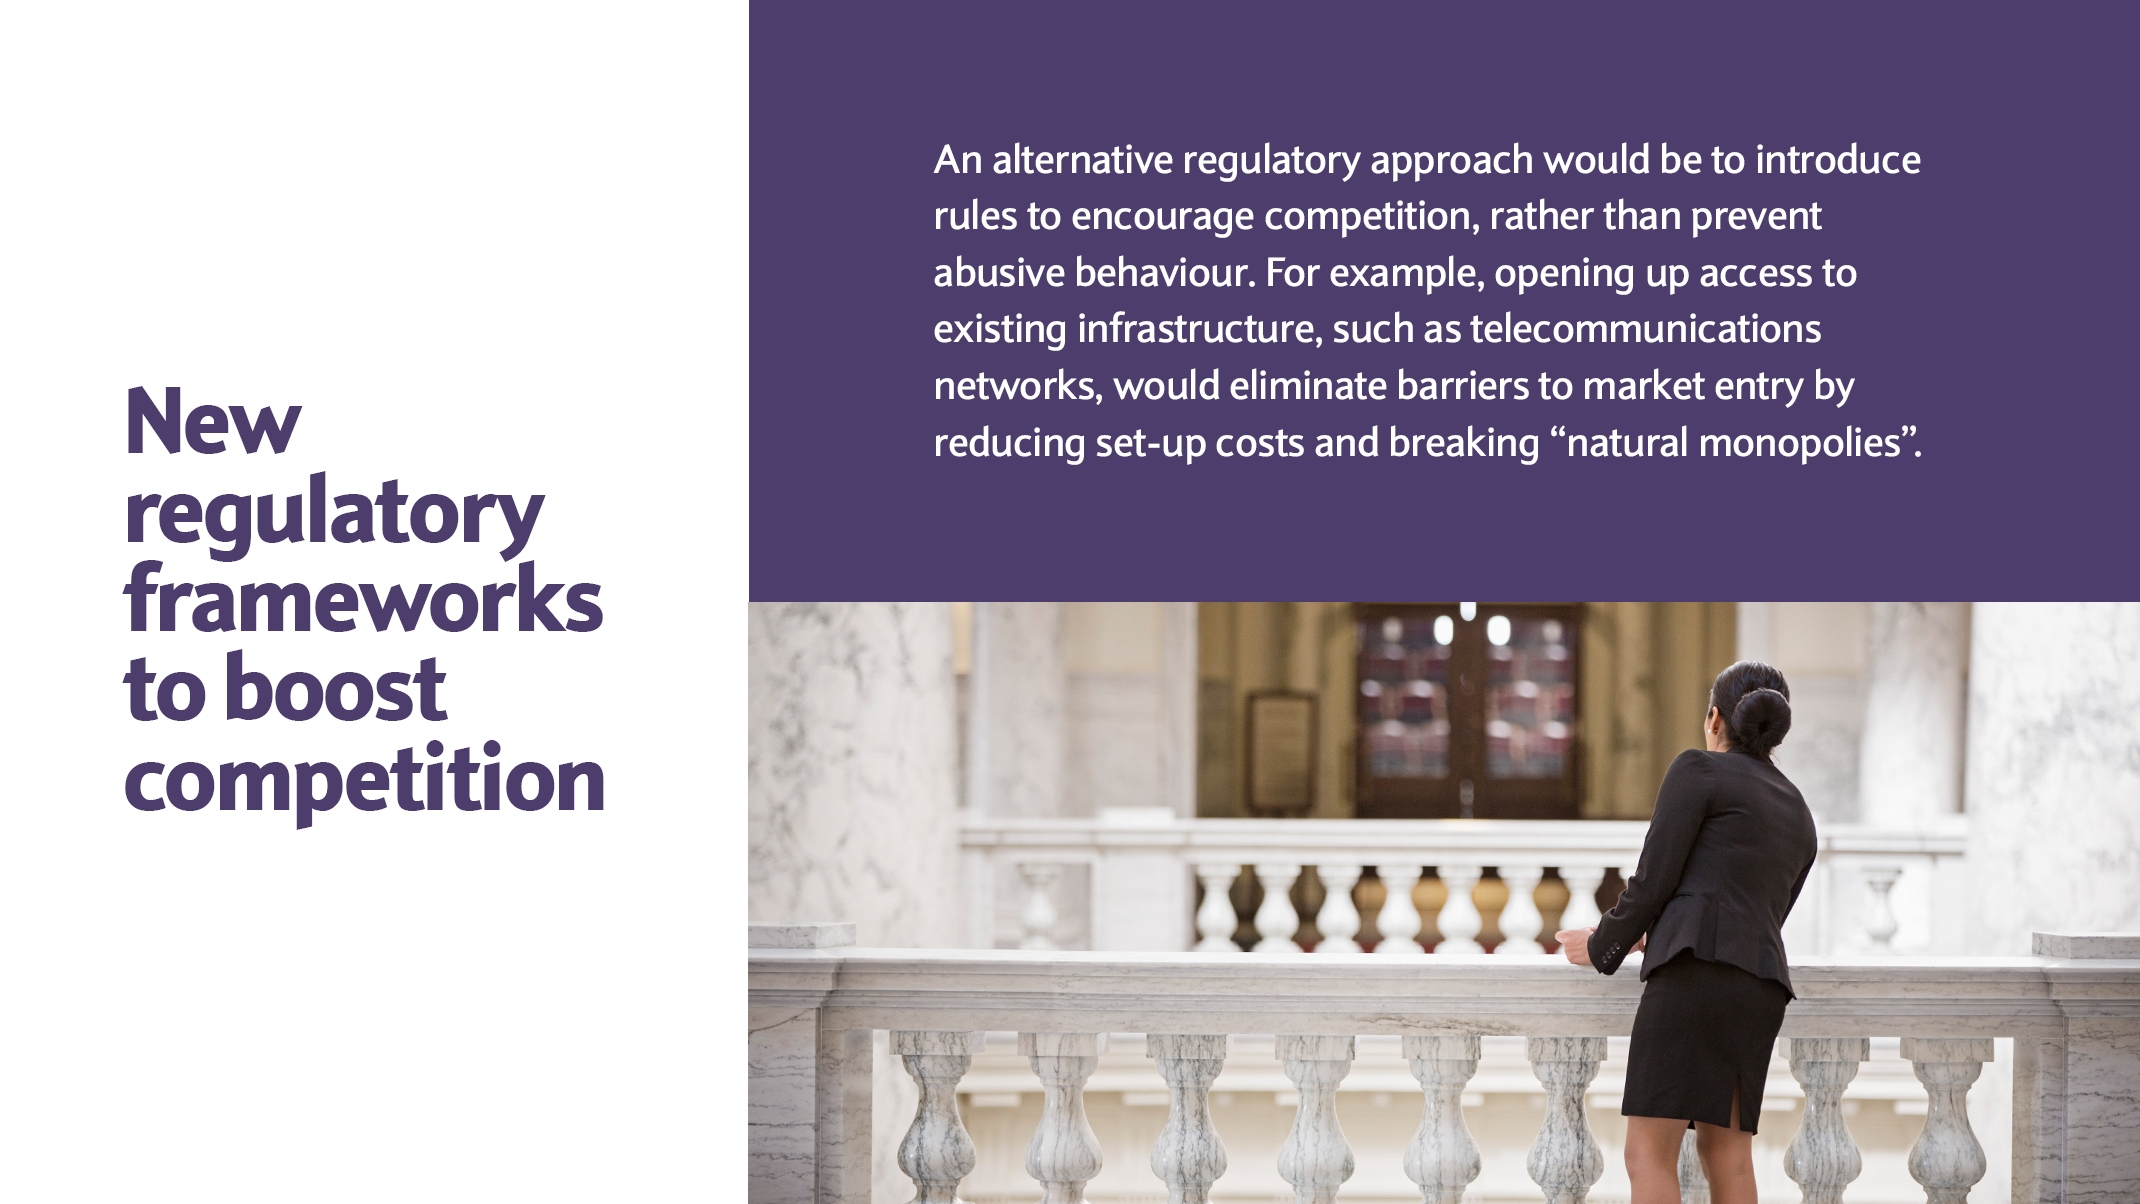 An alternative regulatory approach would be to introduce rules to encourage competition, rather than prevent abusive behaviour. For example, opening up access to existing infrastructure, such as telecommunications networks, would eliminate barriers to market entry by reducing set-up costs and breaking “natural monopolies”.  